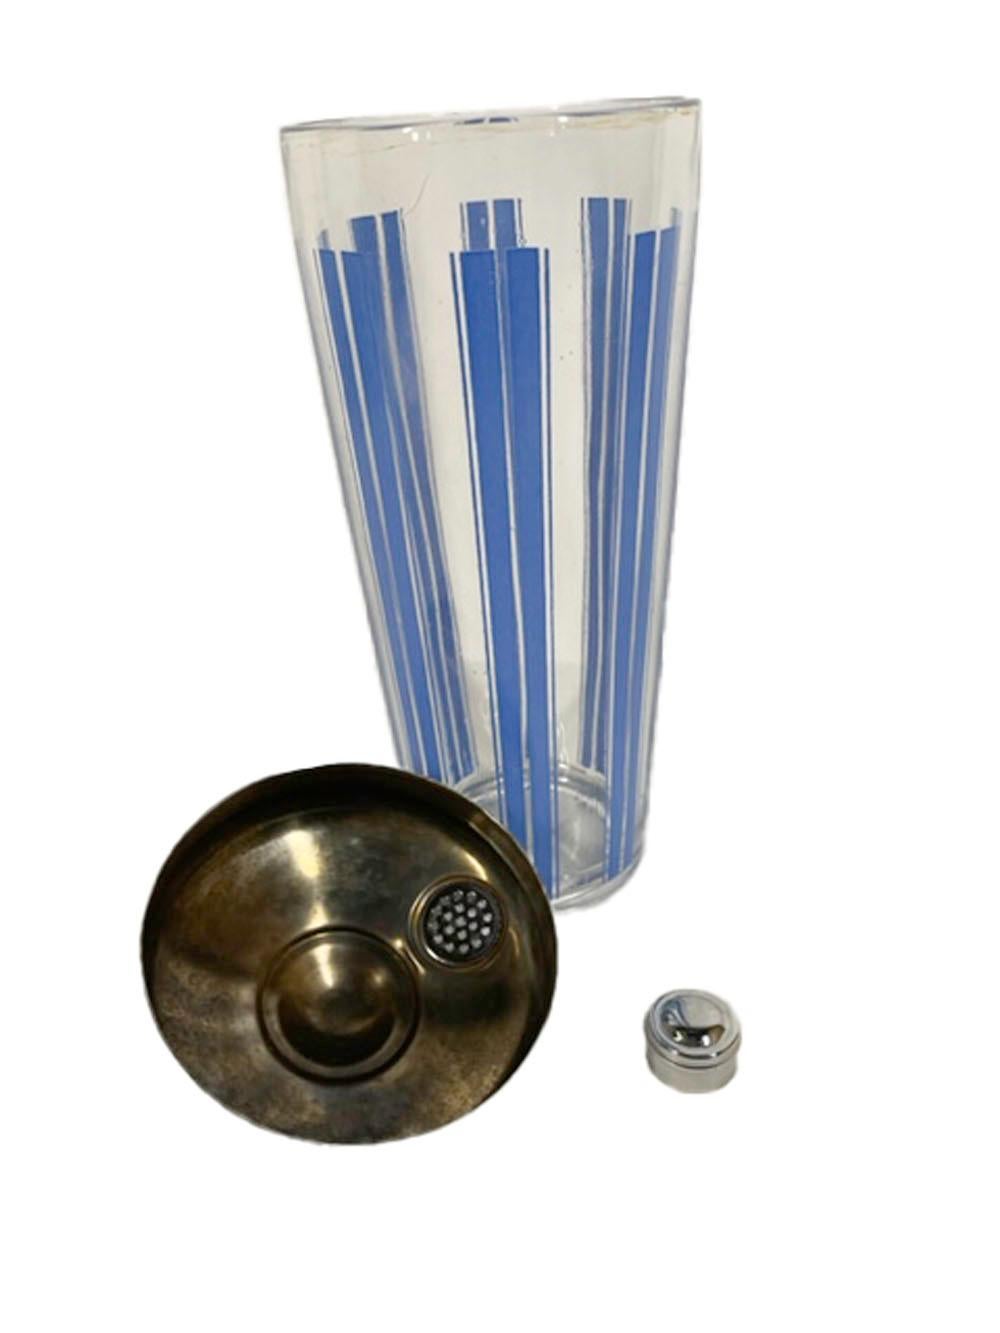 American Three Piece Art Deco Cocktail Shaker Set with Blue Enamel Vertical Lines For Sale